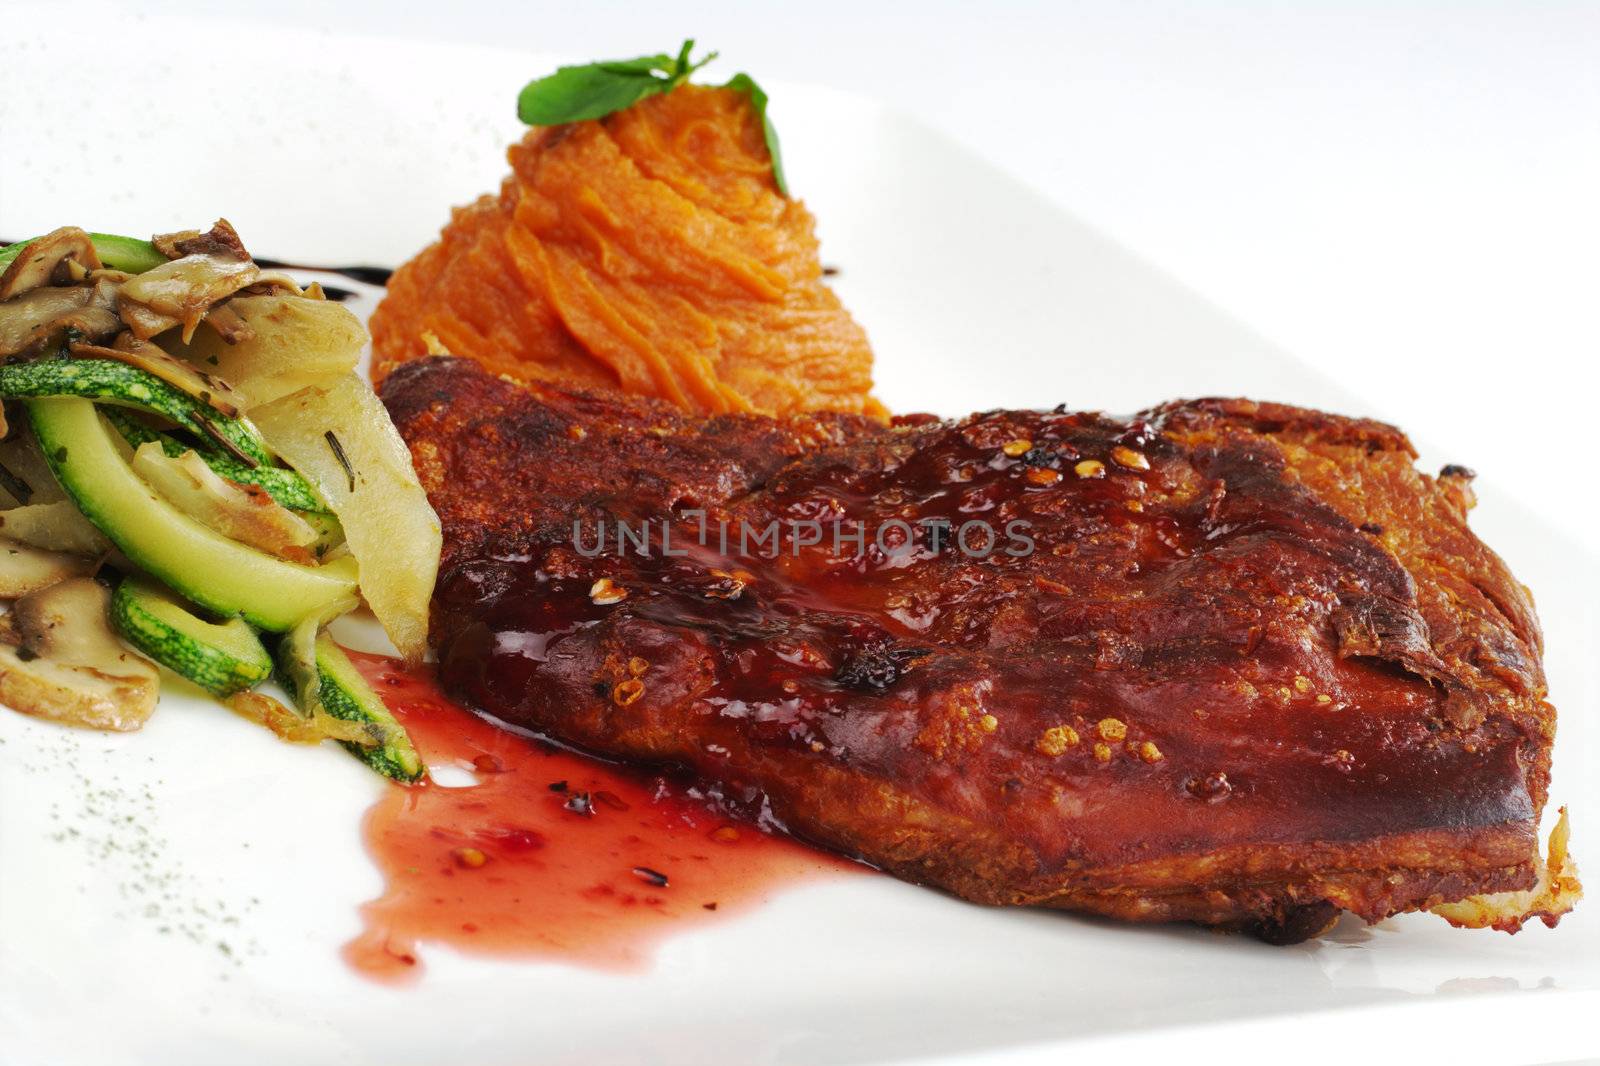 Main course: Ribs with red sauce, fried vegetables and mashed sweet potatoes (Selective Focus)